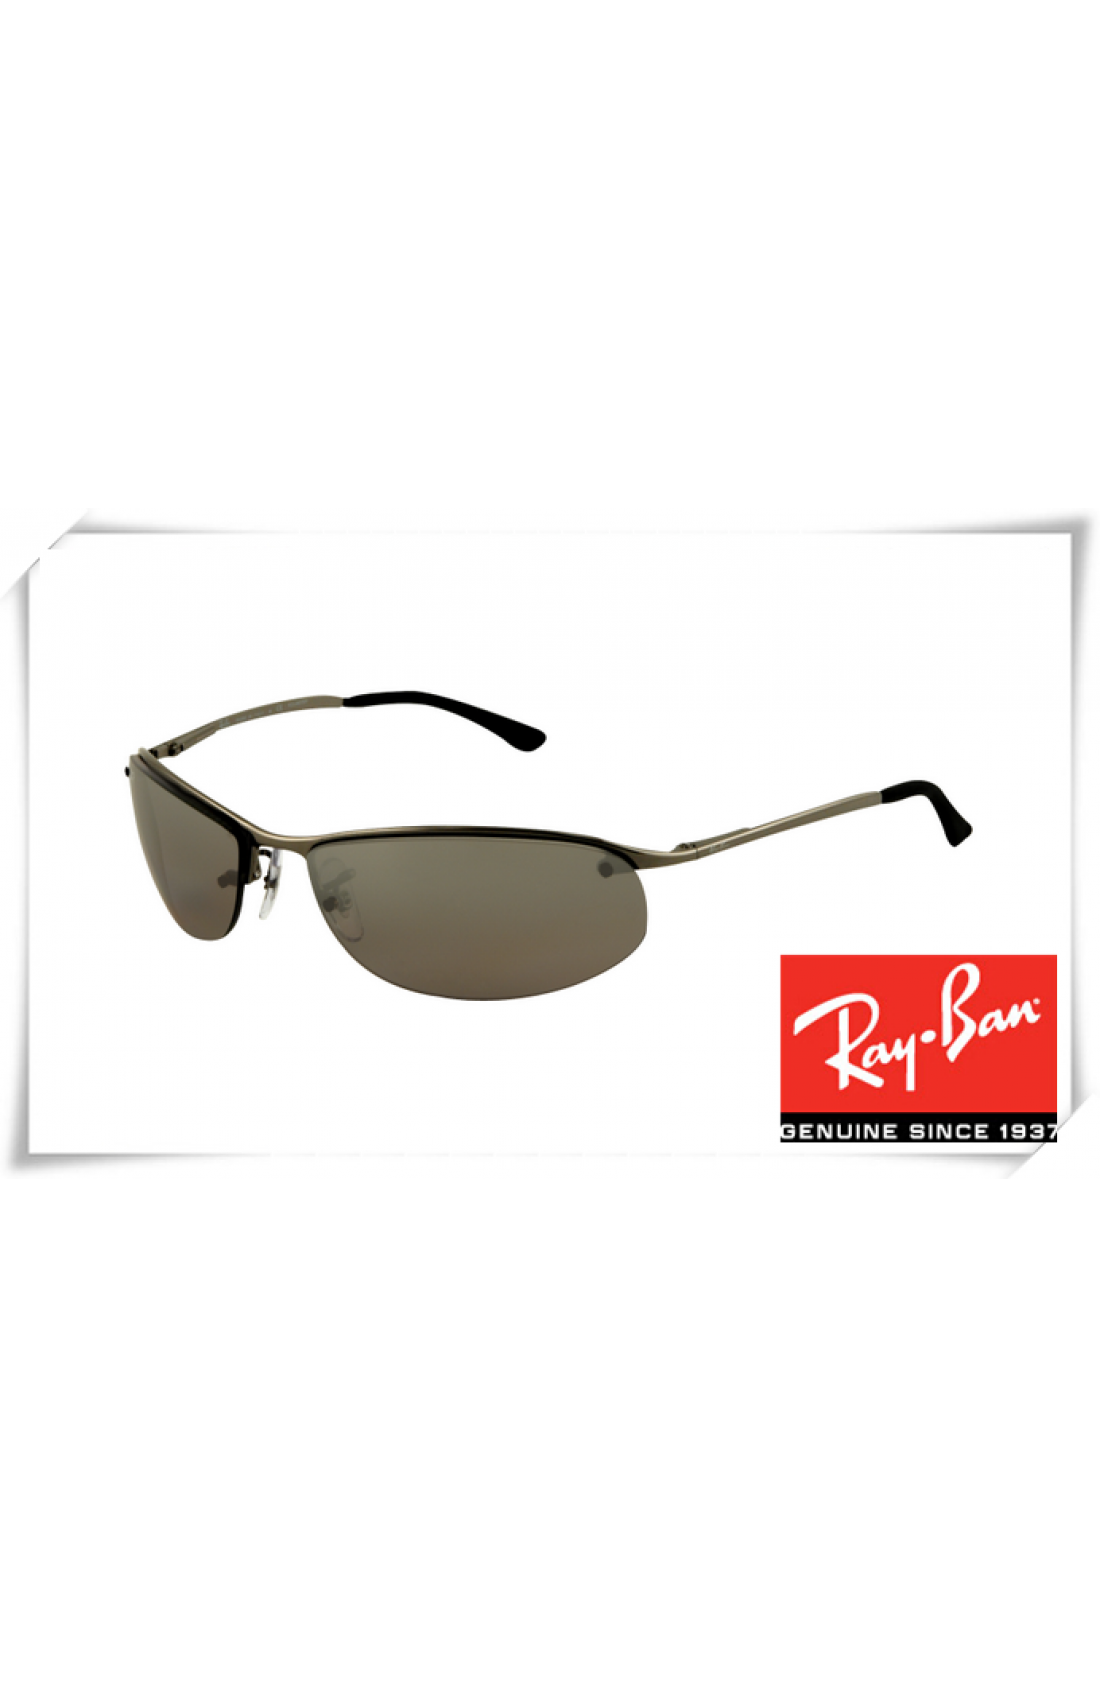 Cheap Ray Ban RB3179 Top Bar Oval 